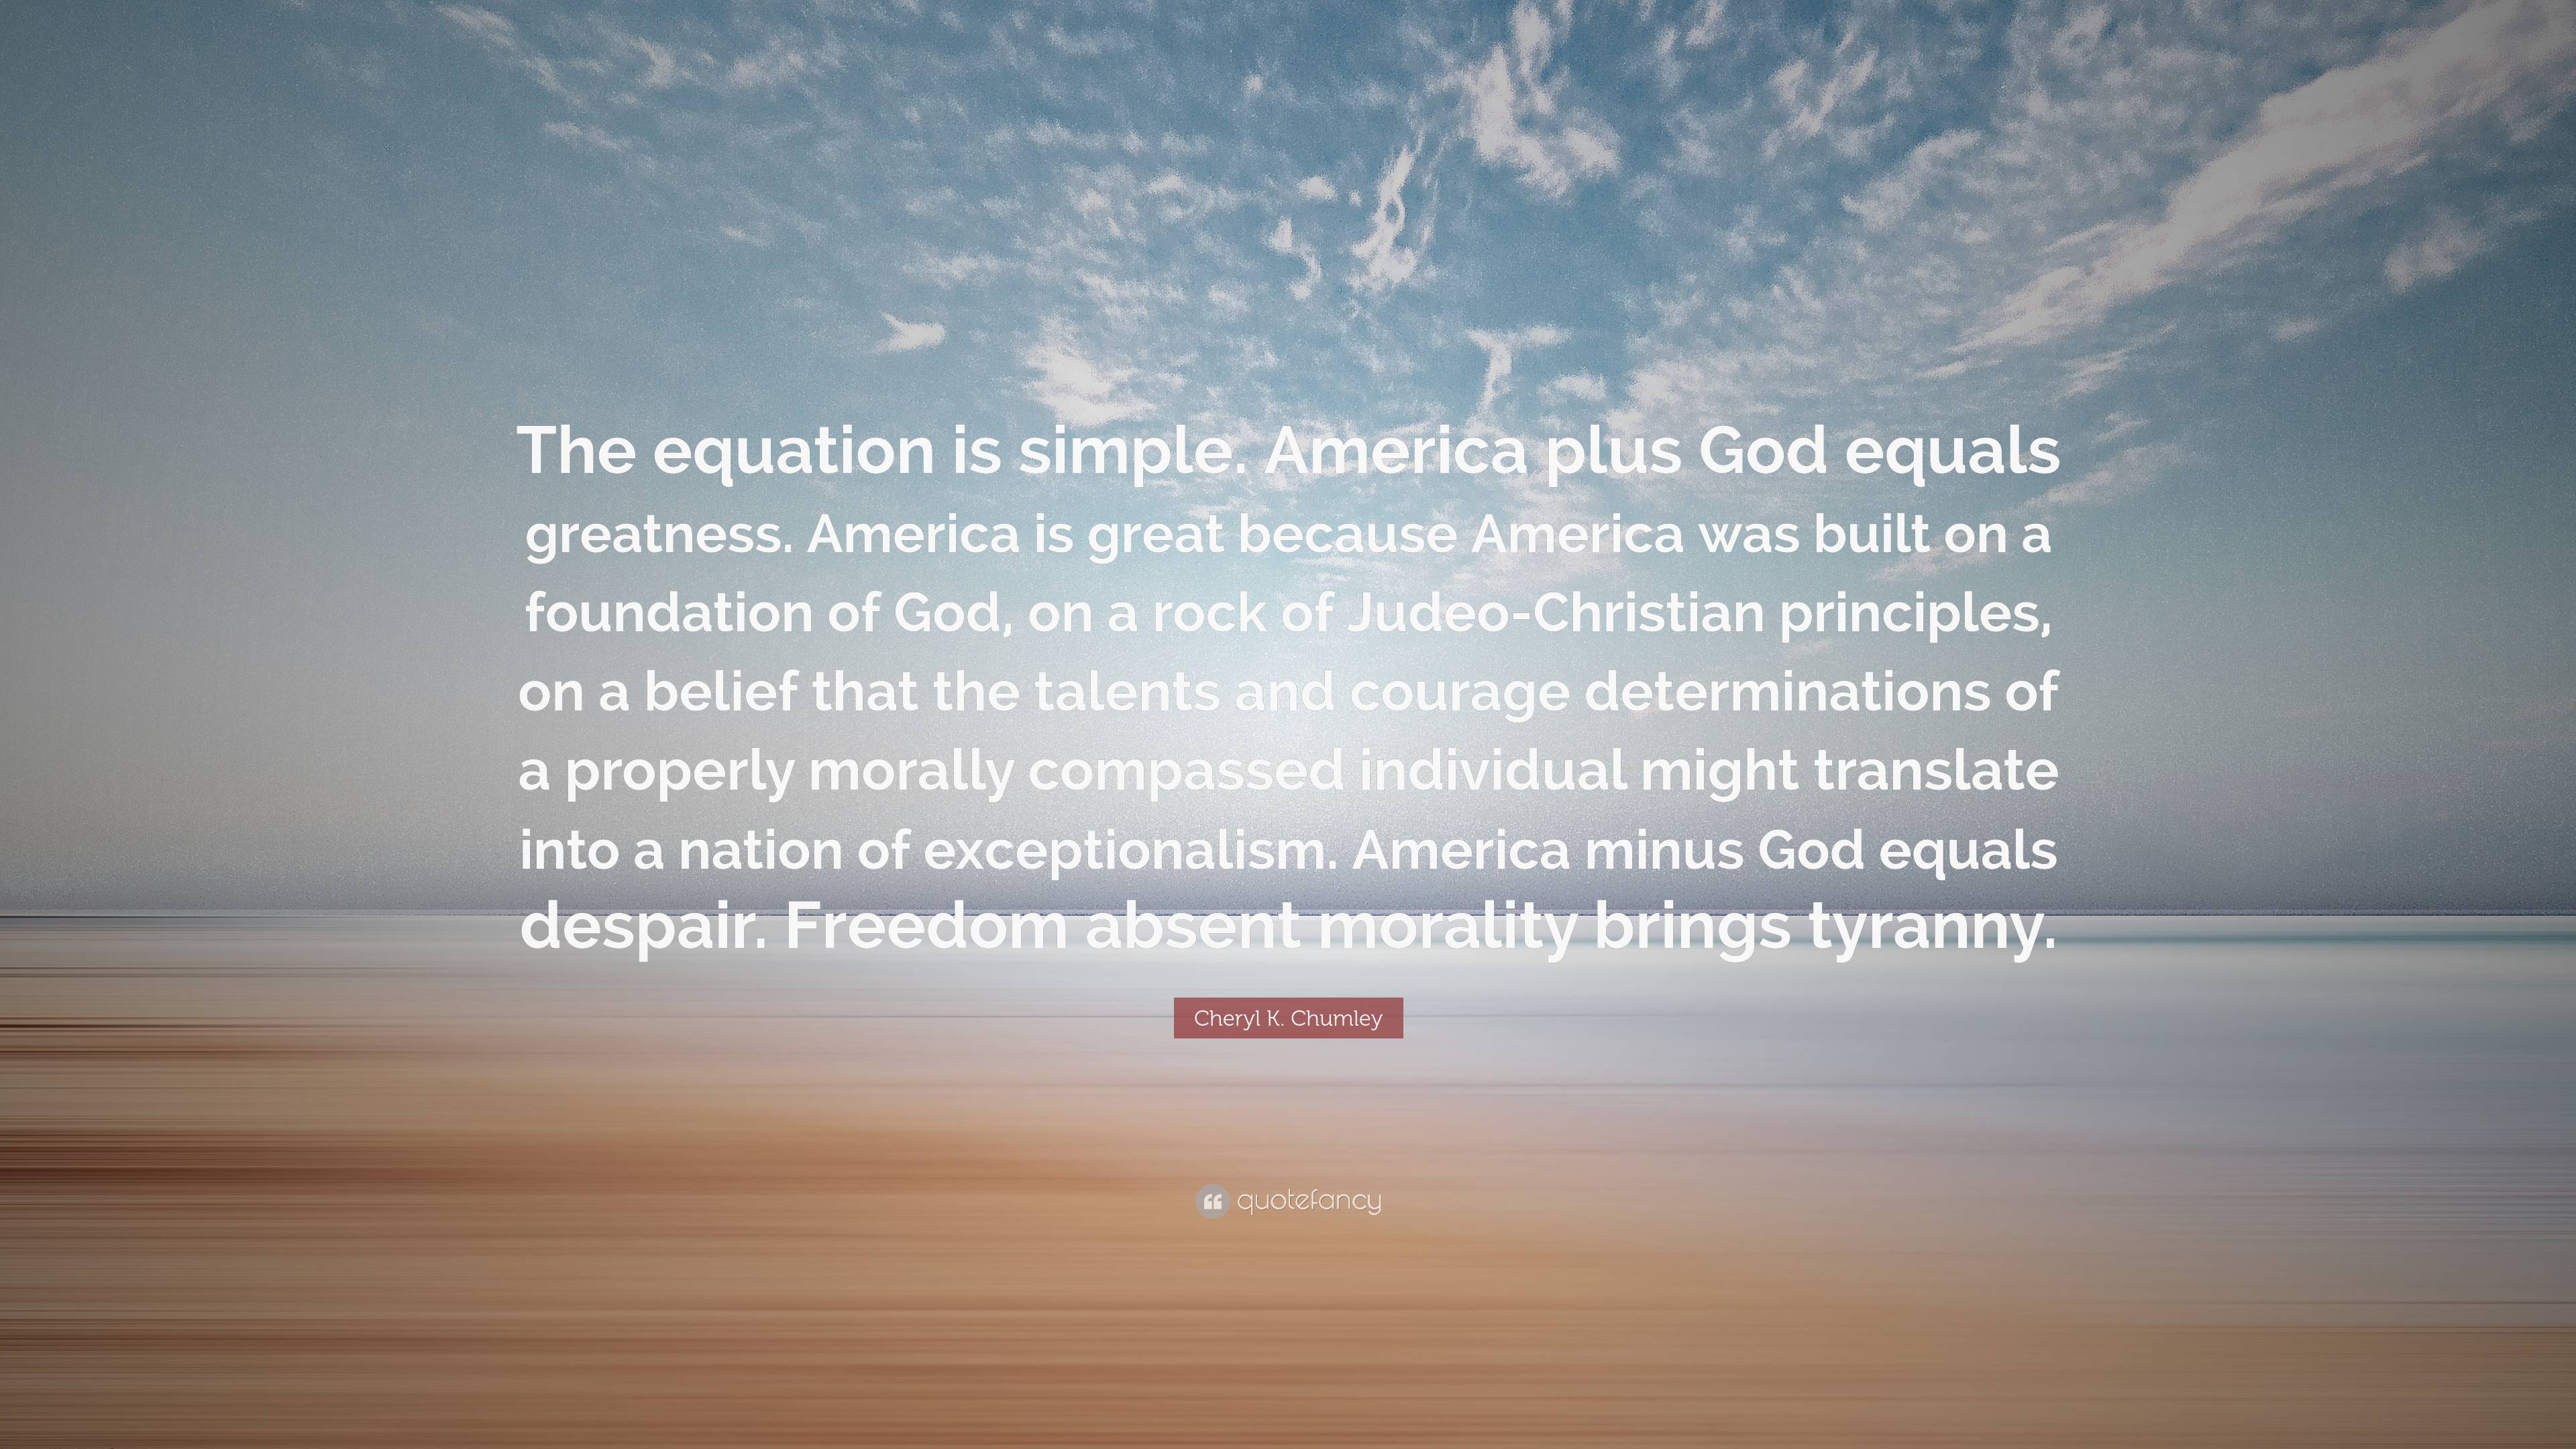 Cheryl K. Chumley Quote: “The equation is simple. America plus God equals greatness. America is great because America was built on a of...”